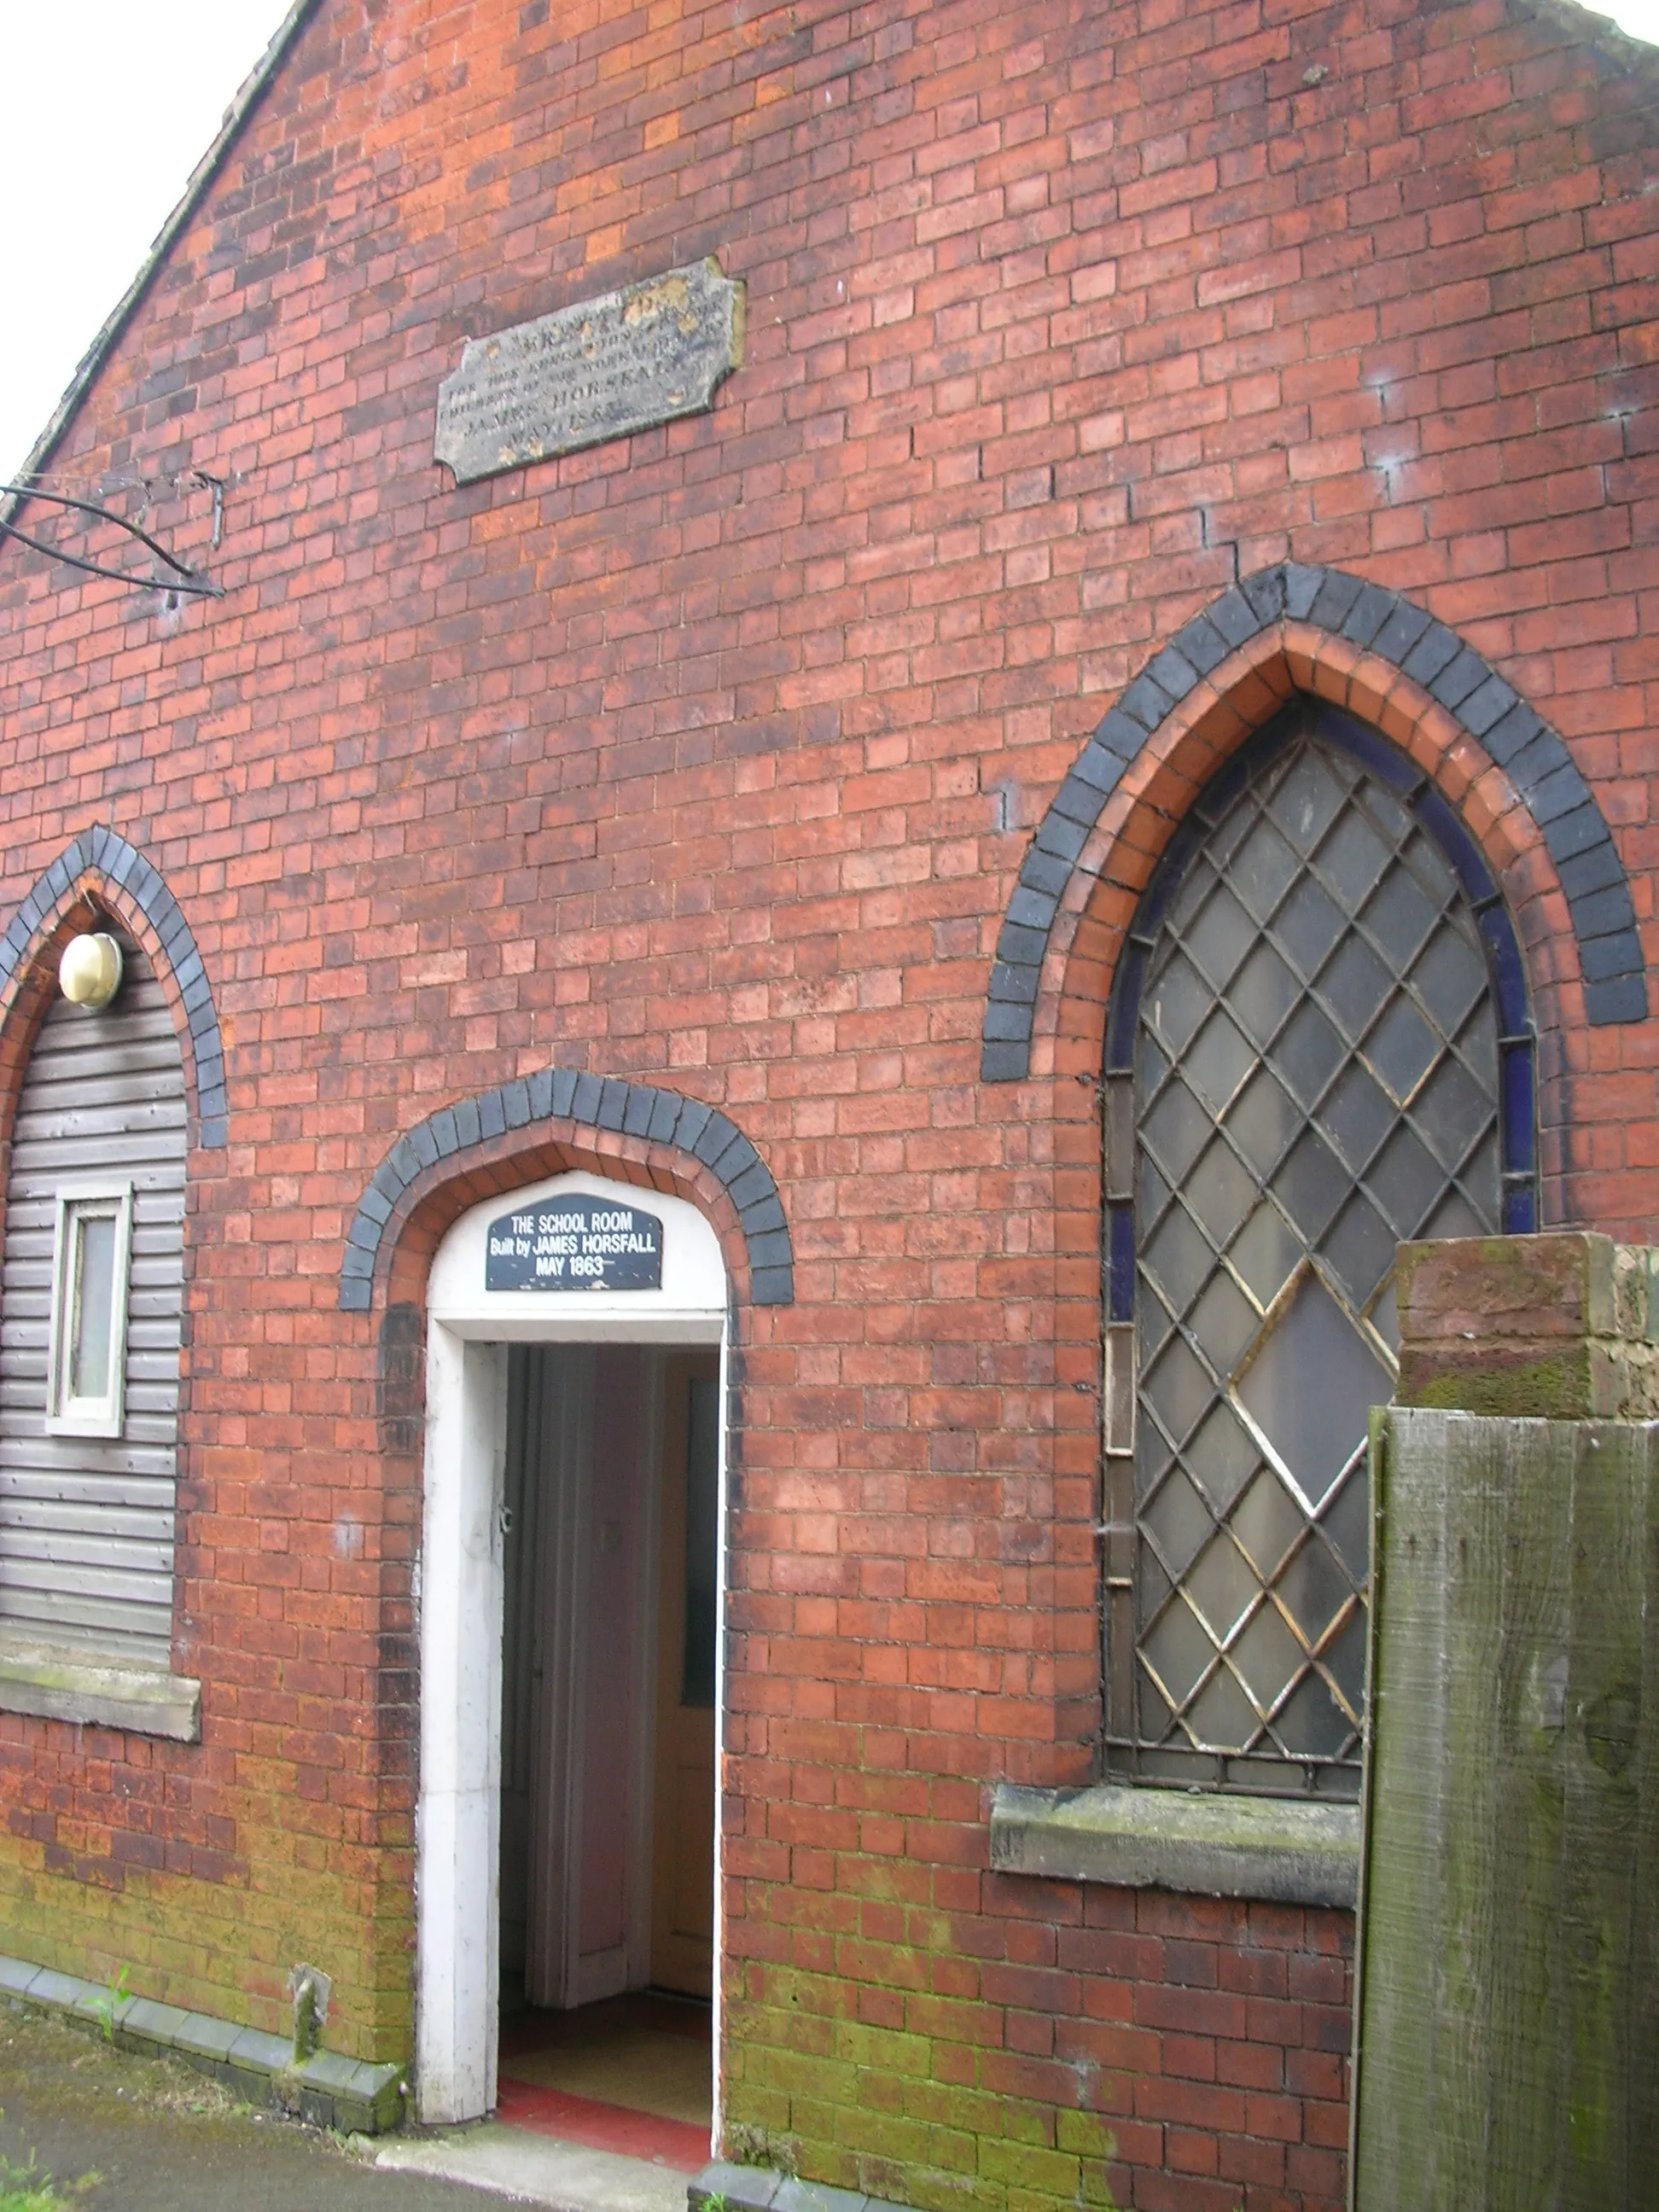 Photo showing: The school room built by James Horsfall in 1863 within Hay Mills factory in Small Heath, Birmingham, England.
Historic manufacturer of patented steel wire used for piano wire and as the armoured sheath for the first transatlantic telegraph cable, 1866. ;Credits:
Photographed by me 18 June 2006. Oosoom